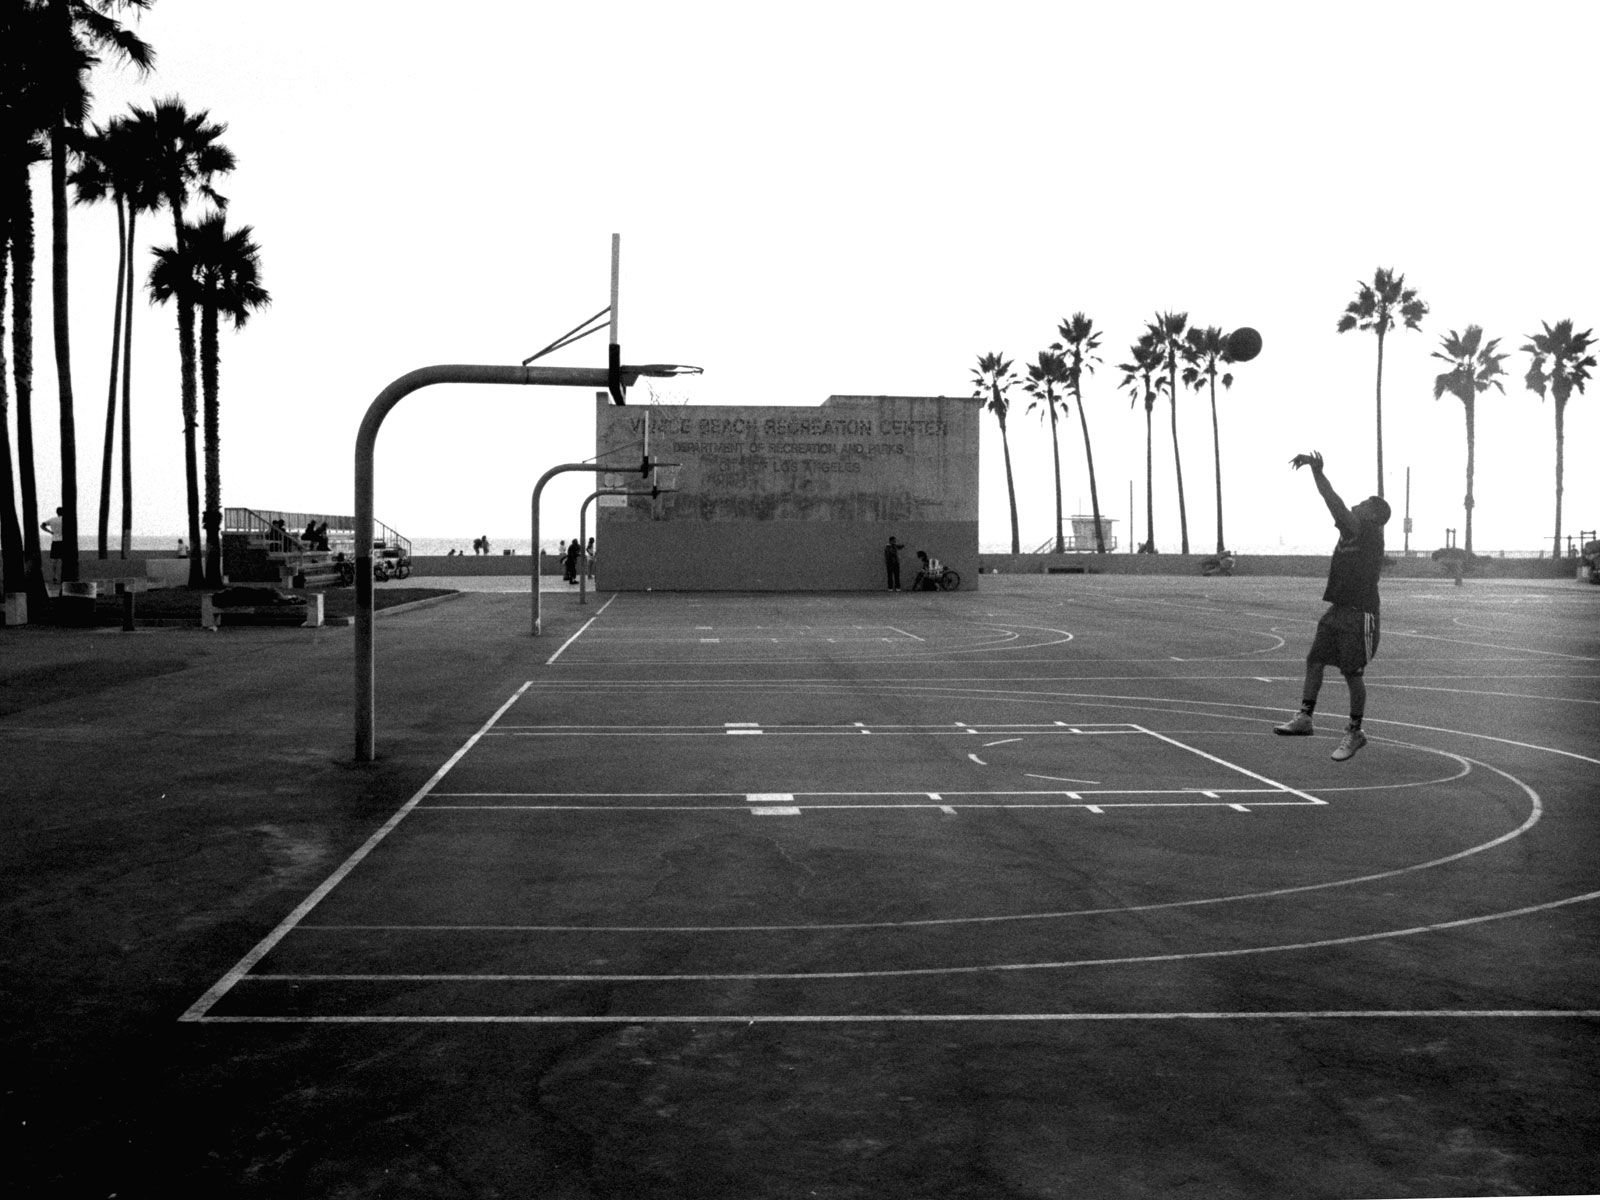 A man playing basketball on a court with palm trees in the background. - Basketball